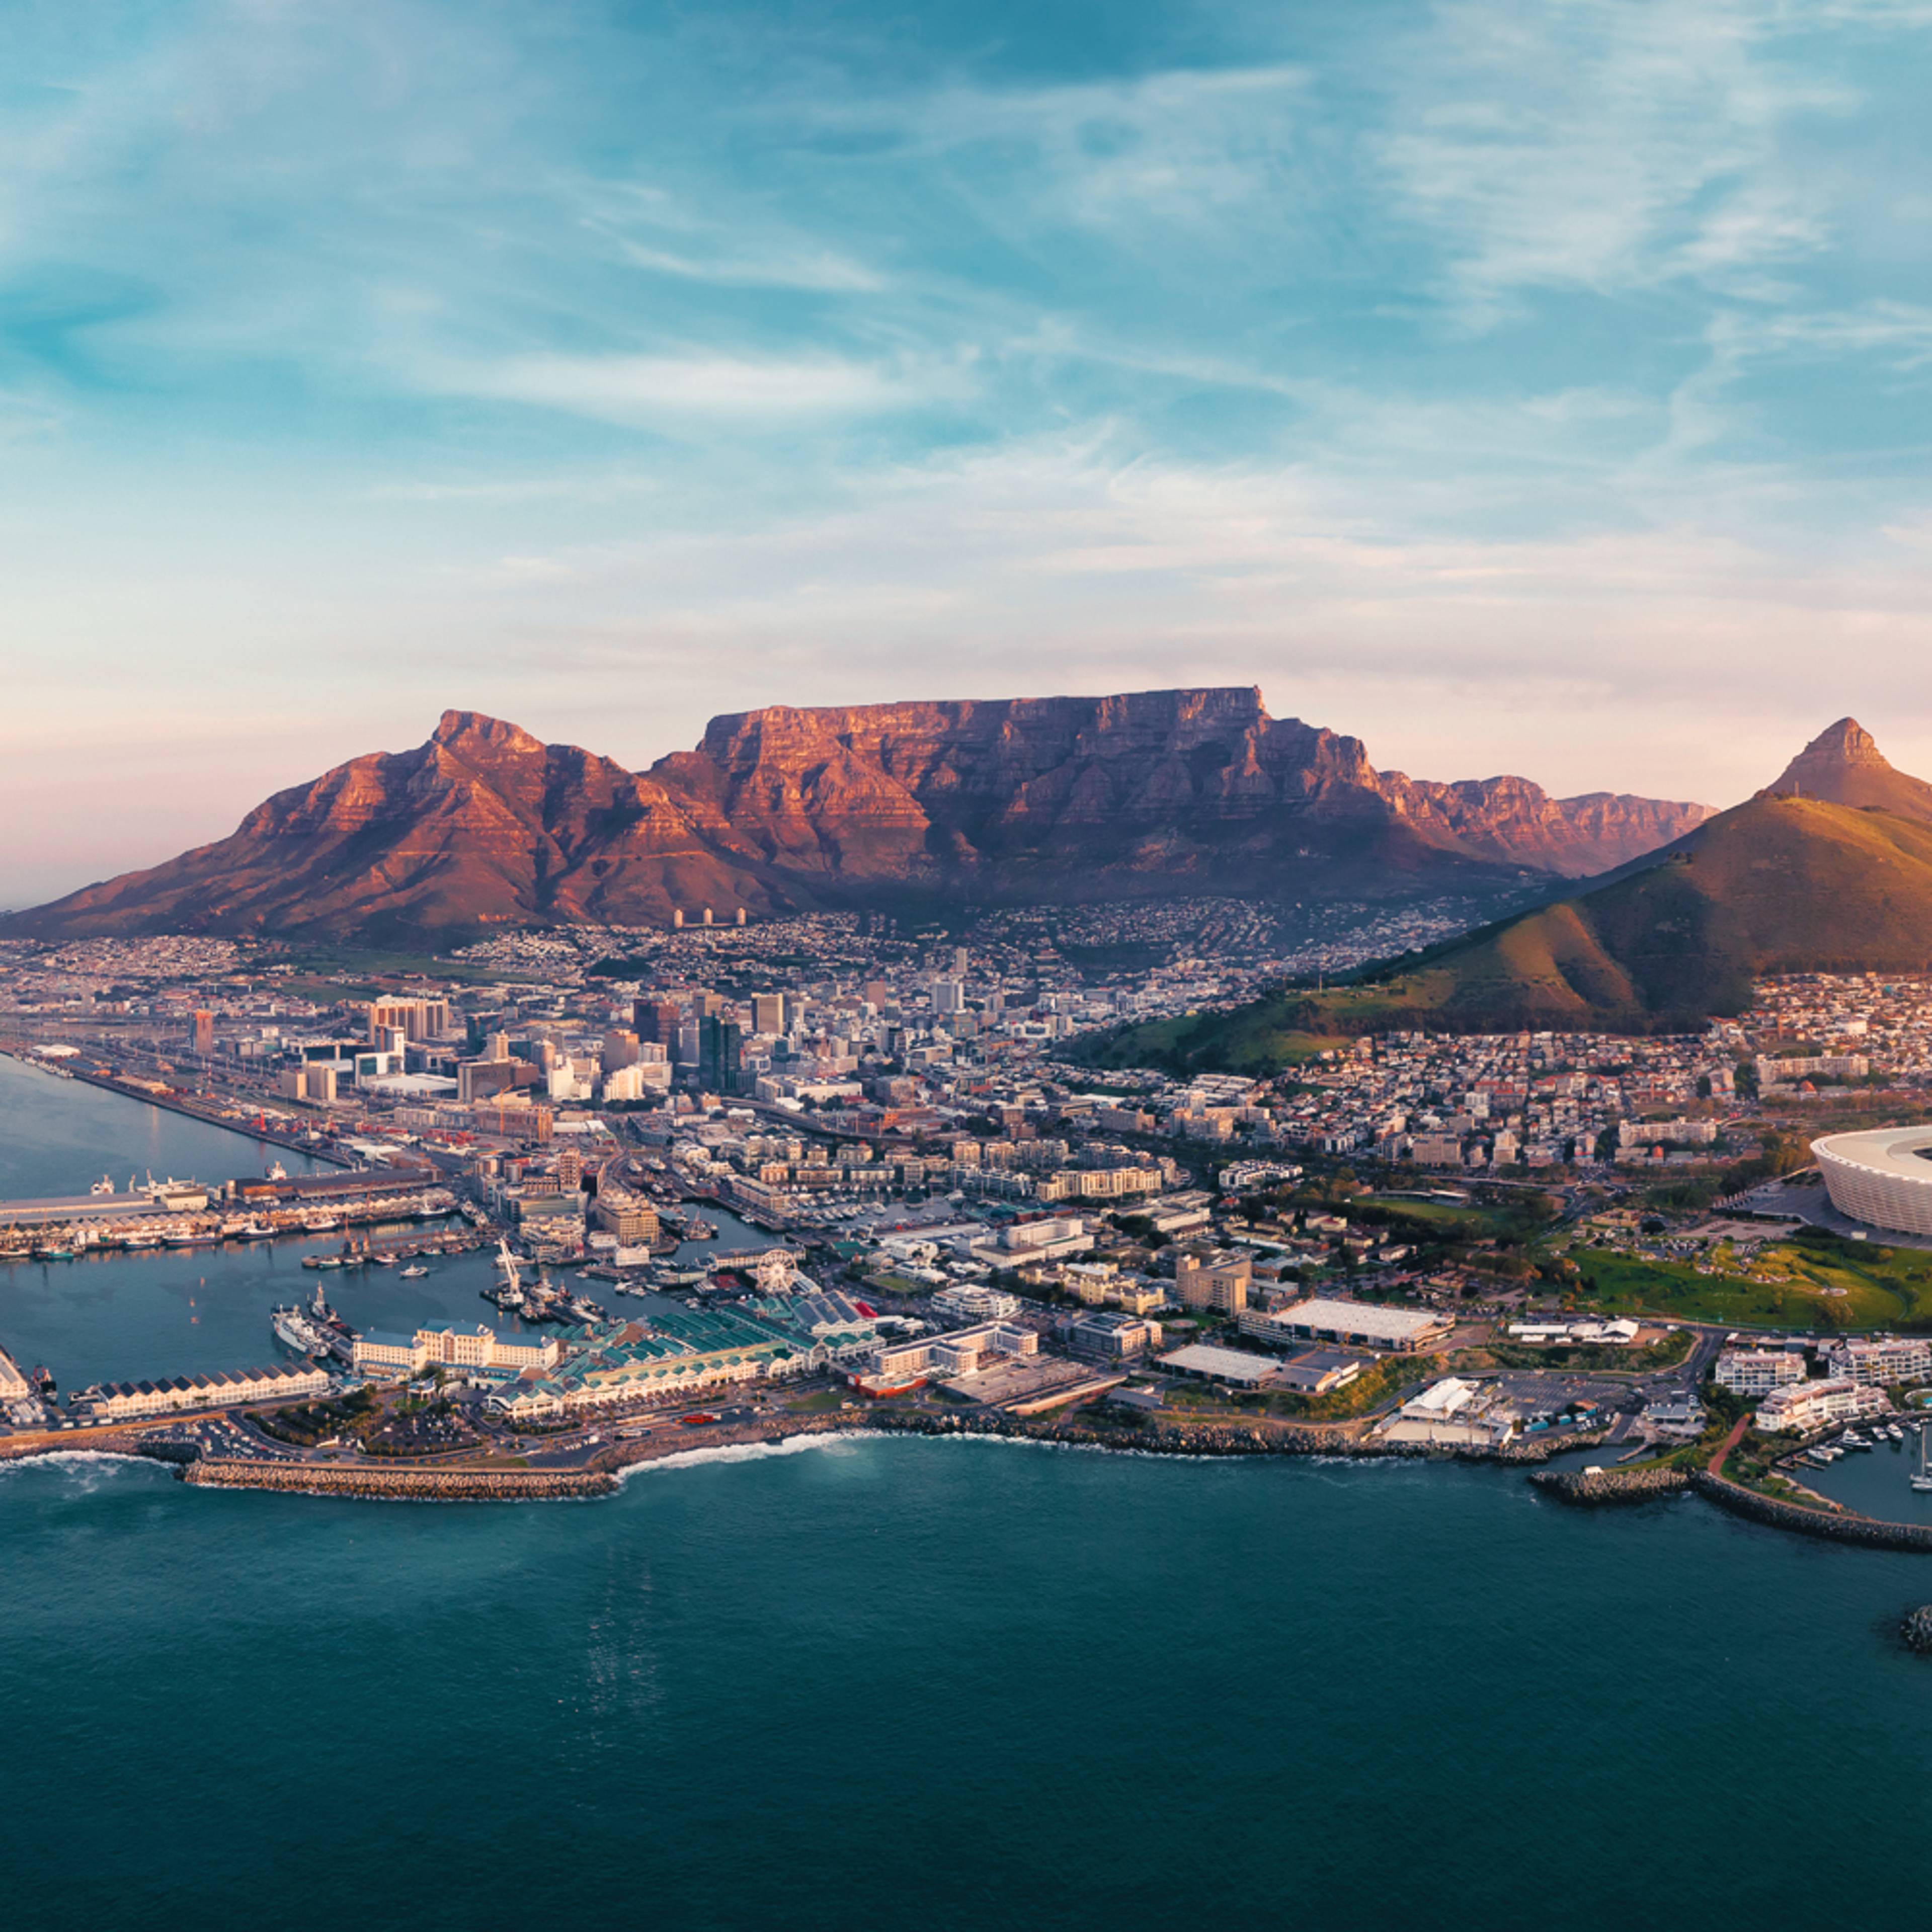 Design your perfect city tour with a local expert in South Africa